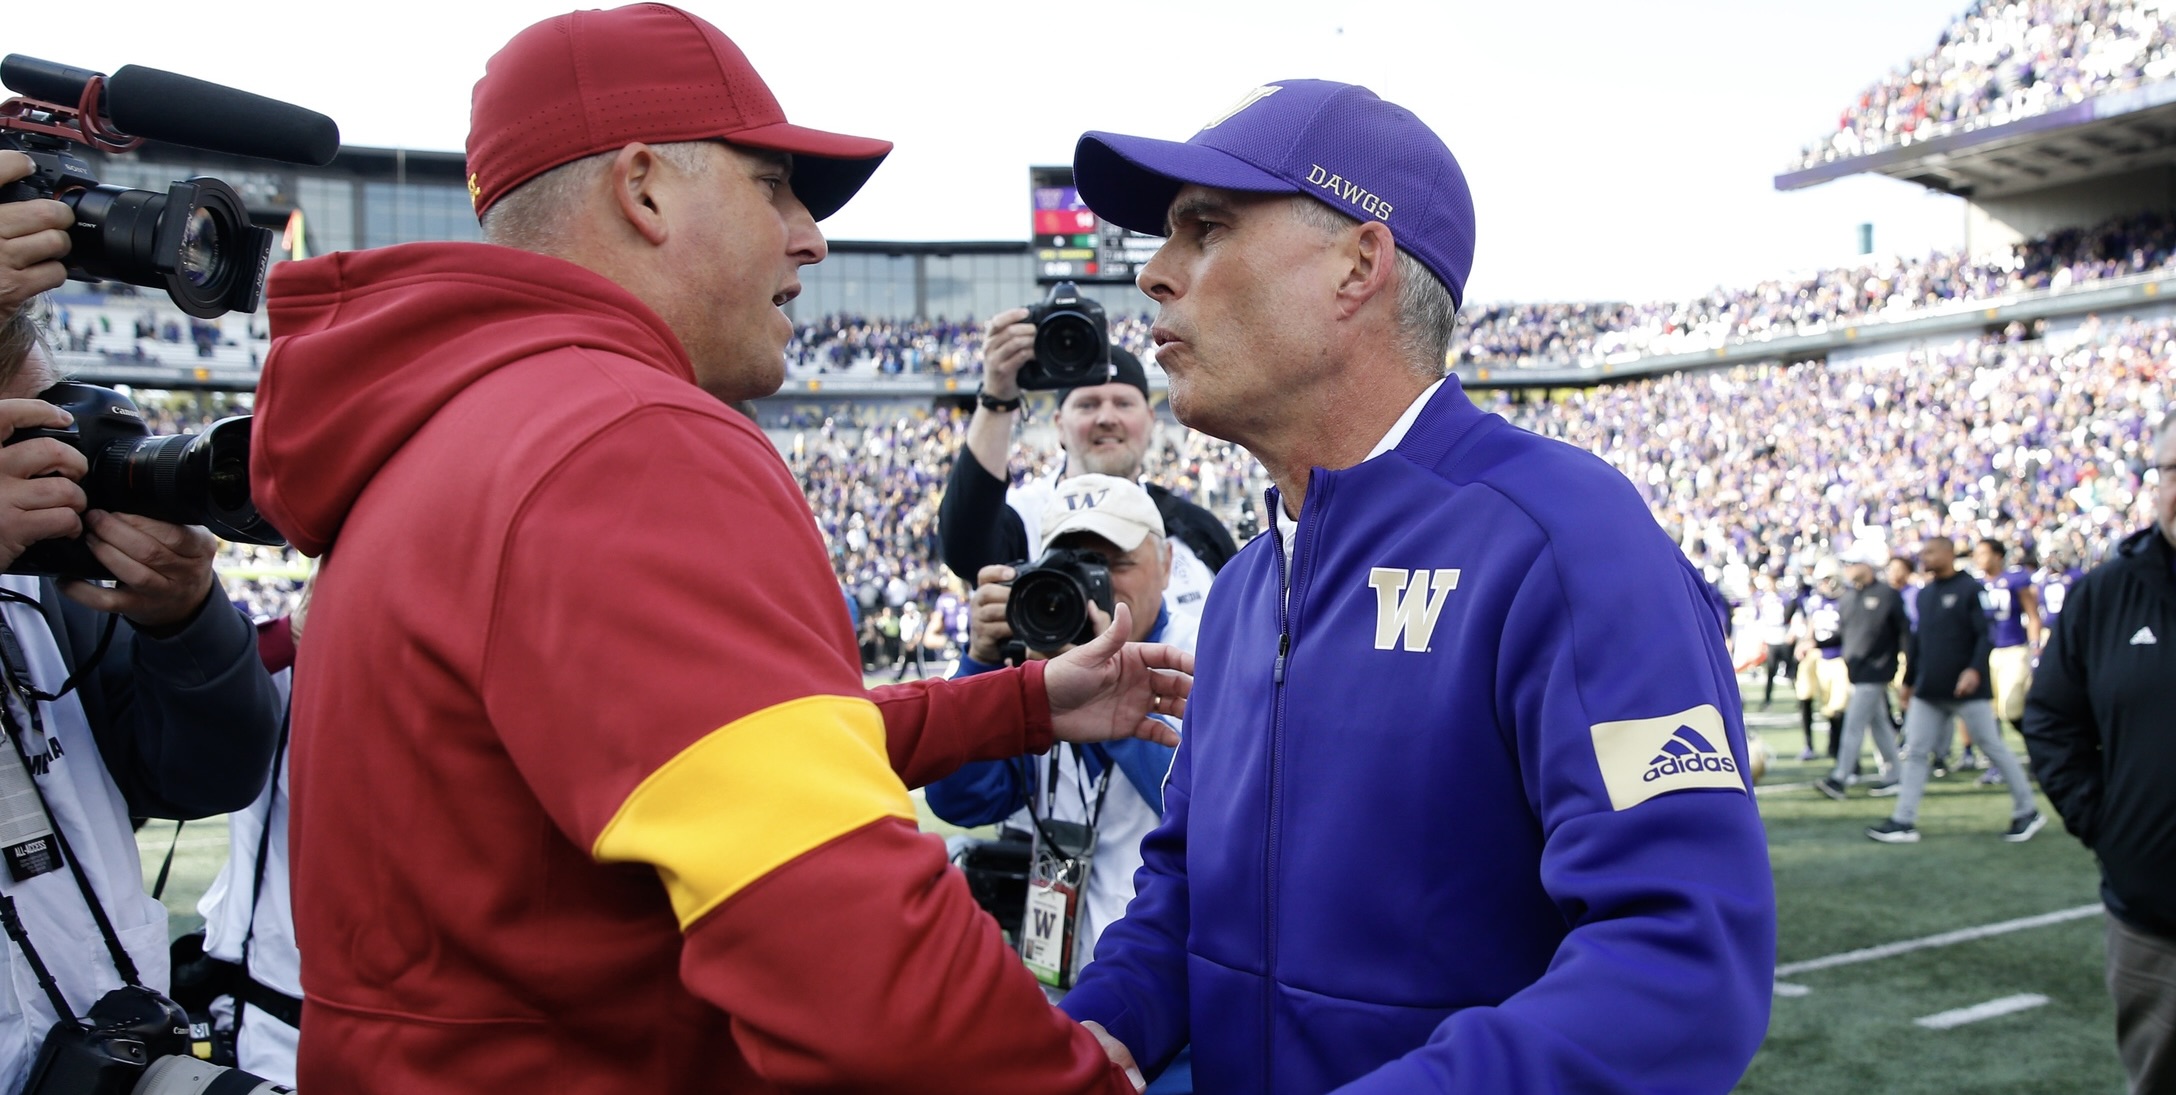 Clay Helton and Chris Petersen, both out of the Pac-12 now, greet each other after the 2019 game, which the UW won 28-14.